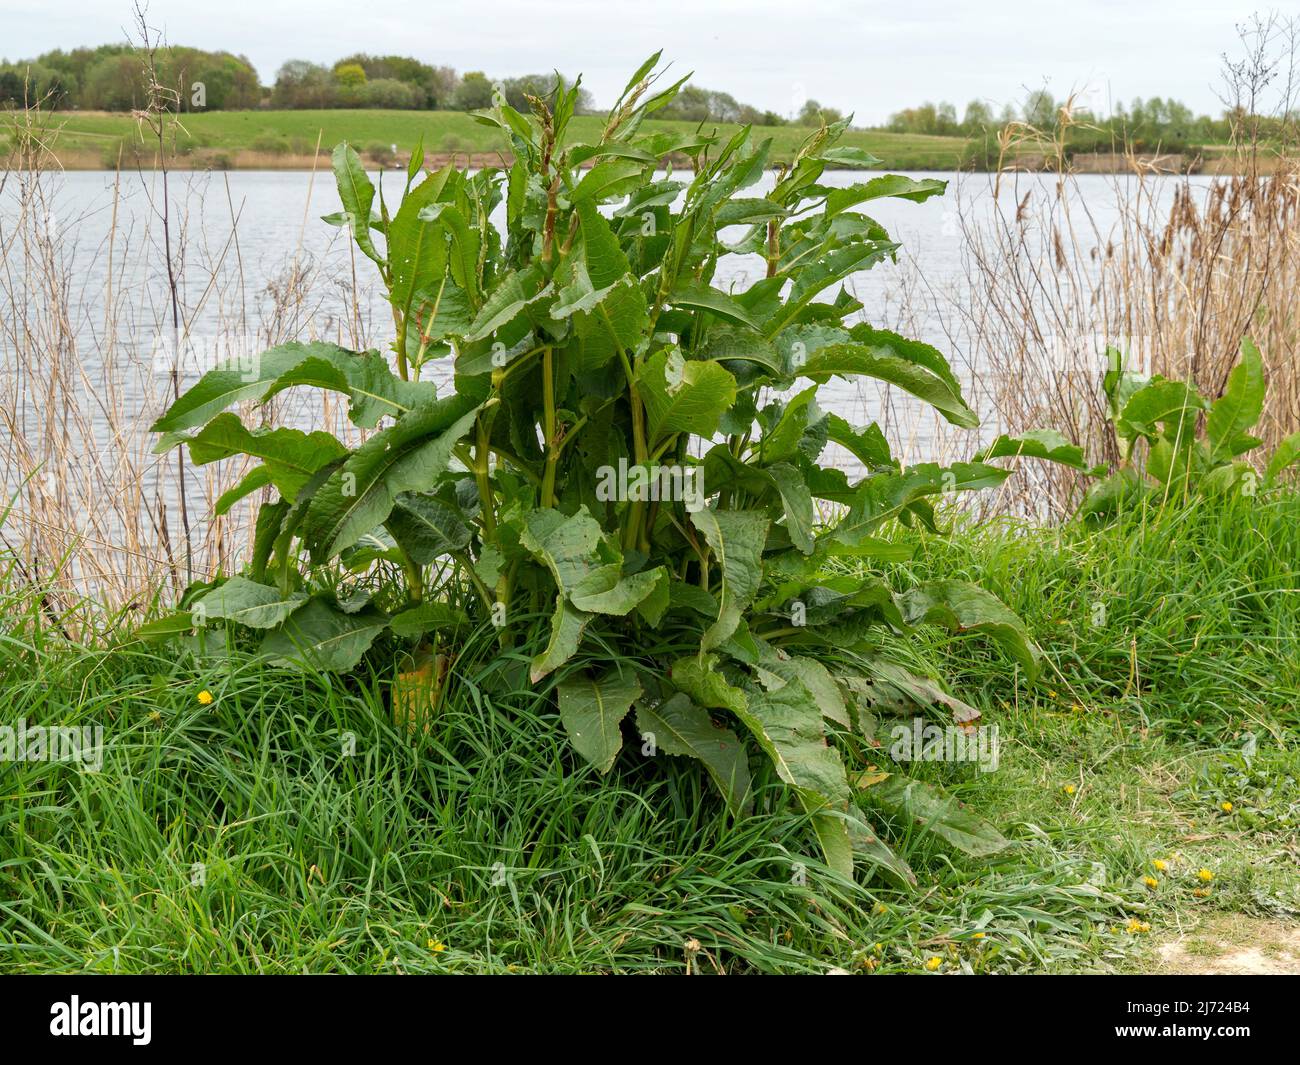 Large dock plant with green leaves beside a pond Stock Photo